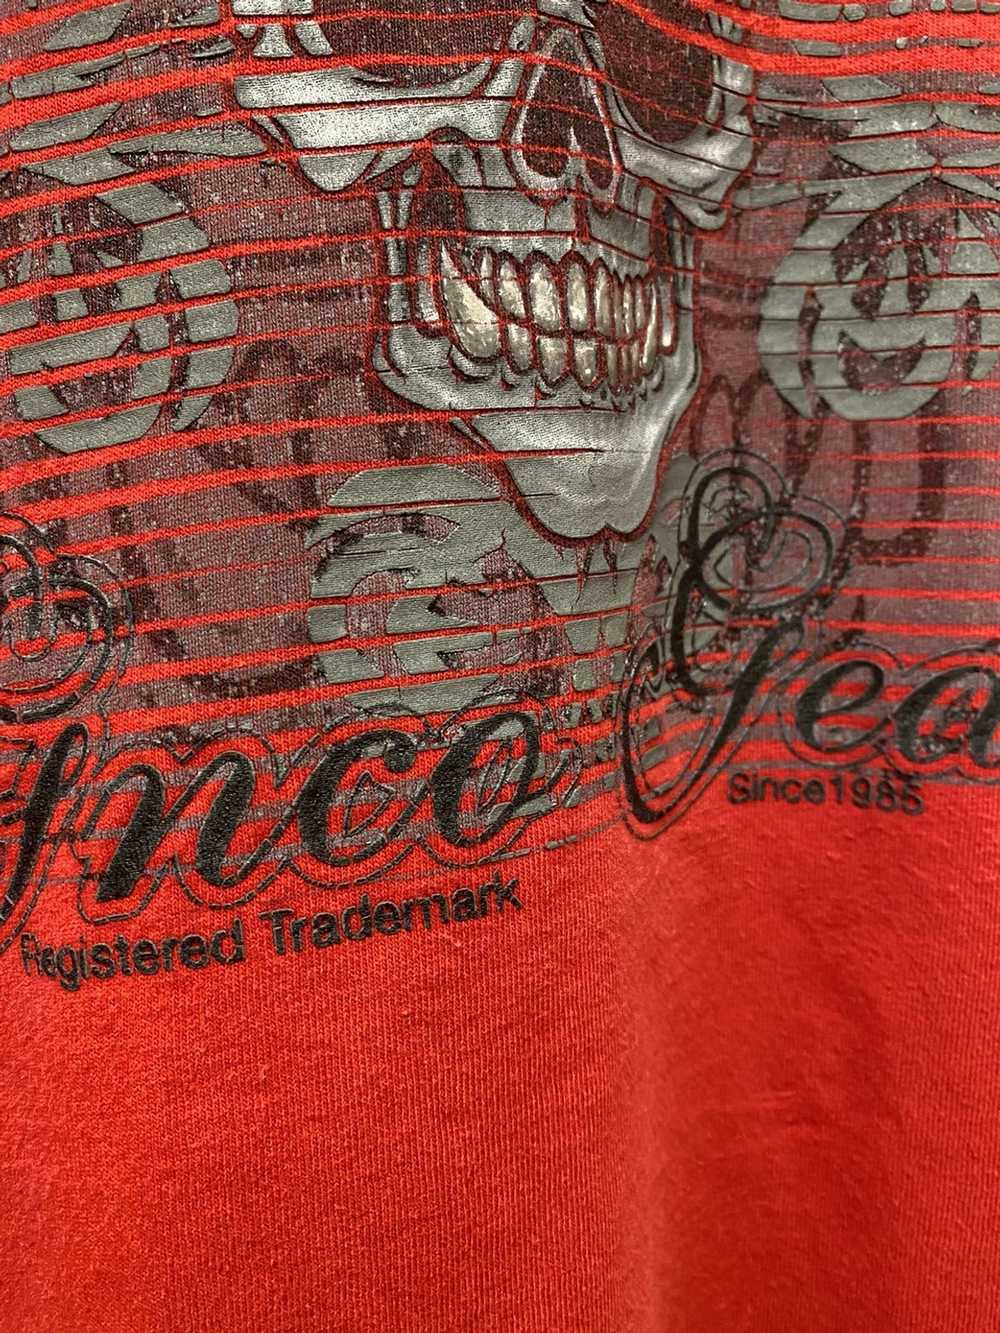 Jnco Jnco jeans long sleeve t - image 3